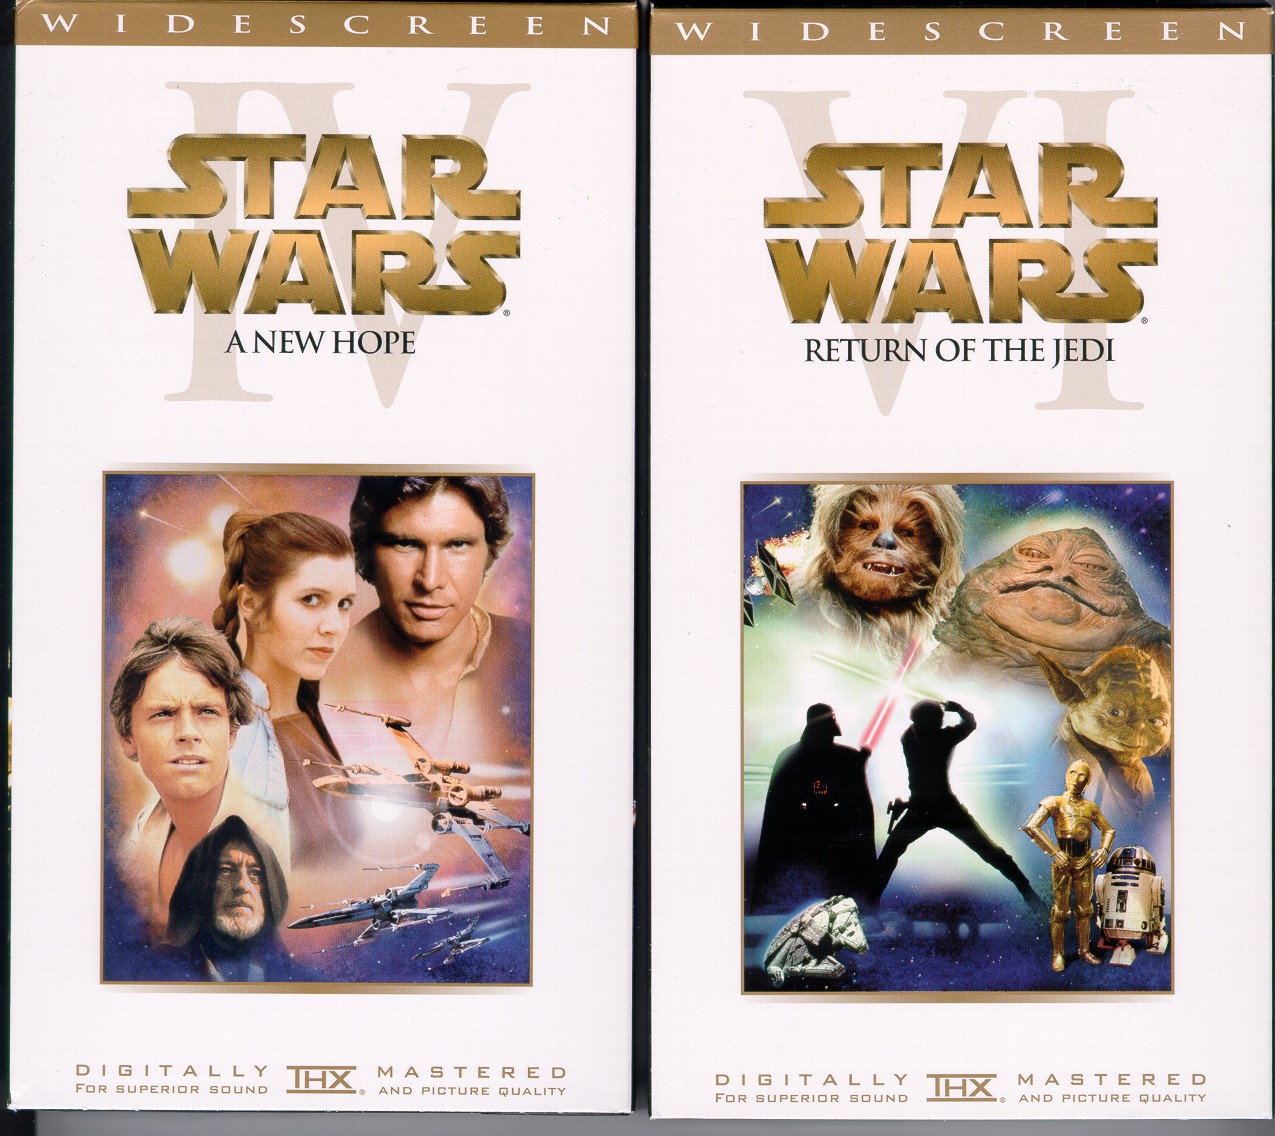 Empire Strikes Back and Return of the Jedi re-release video covers (widescreen - 2000)